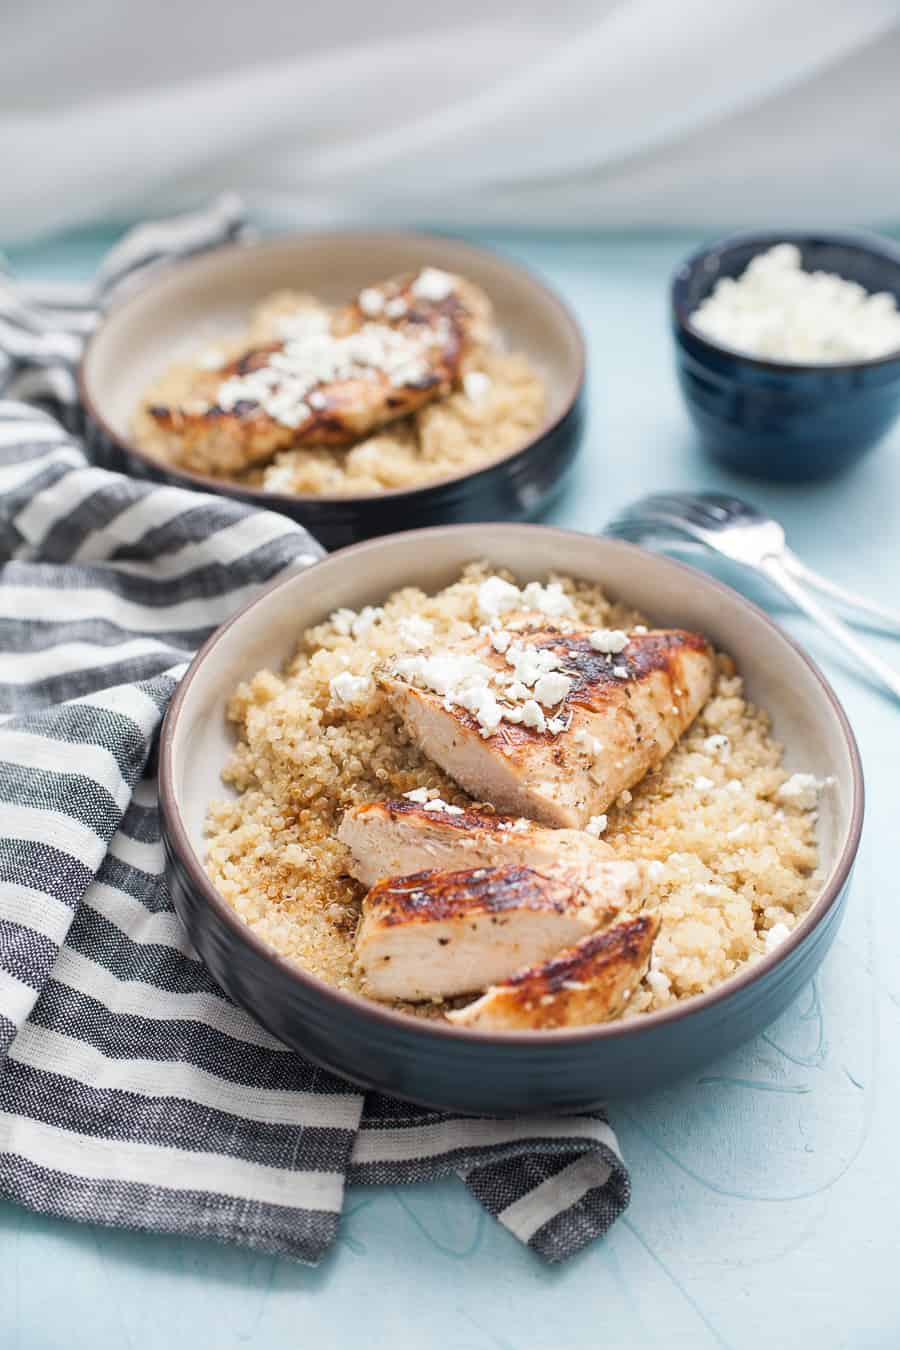 Pan Seared Peach Balsamic Chicken is a healthy, simple weeknight dinner that the whole family will enjoy. Mix up a quick marinade with olive oil, peach balsamic vinegar and spices, let it sit for a little while in the fridge, then pan sear and cover to let it cook through. 